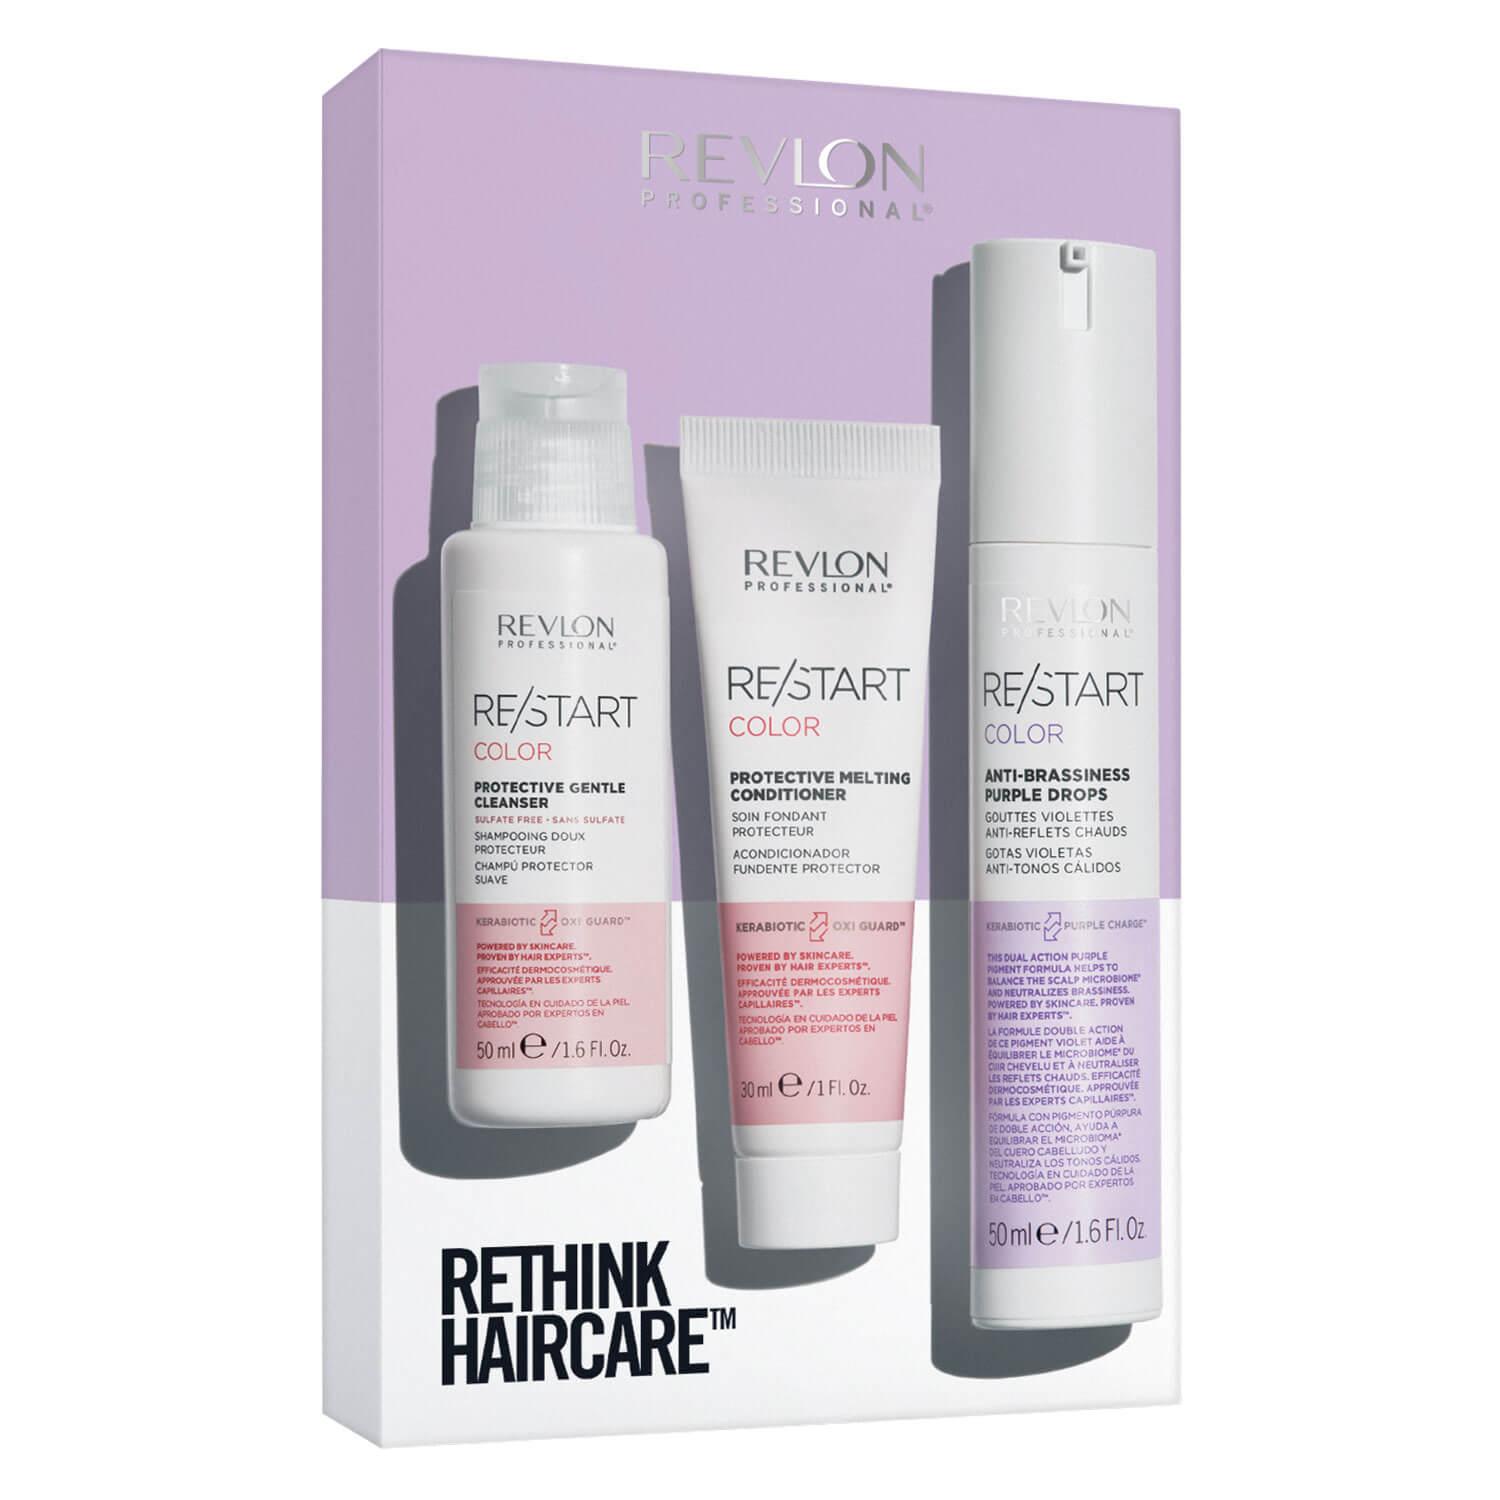 RE/START COLOR - Rethink Haircare Set